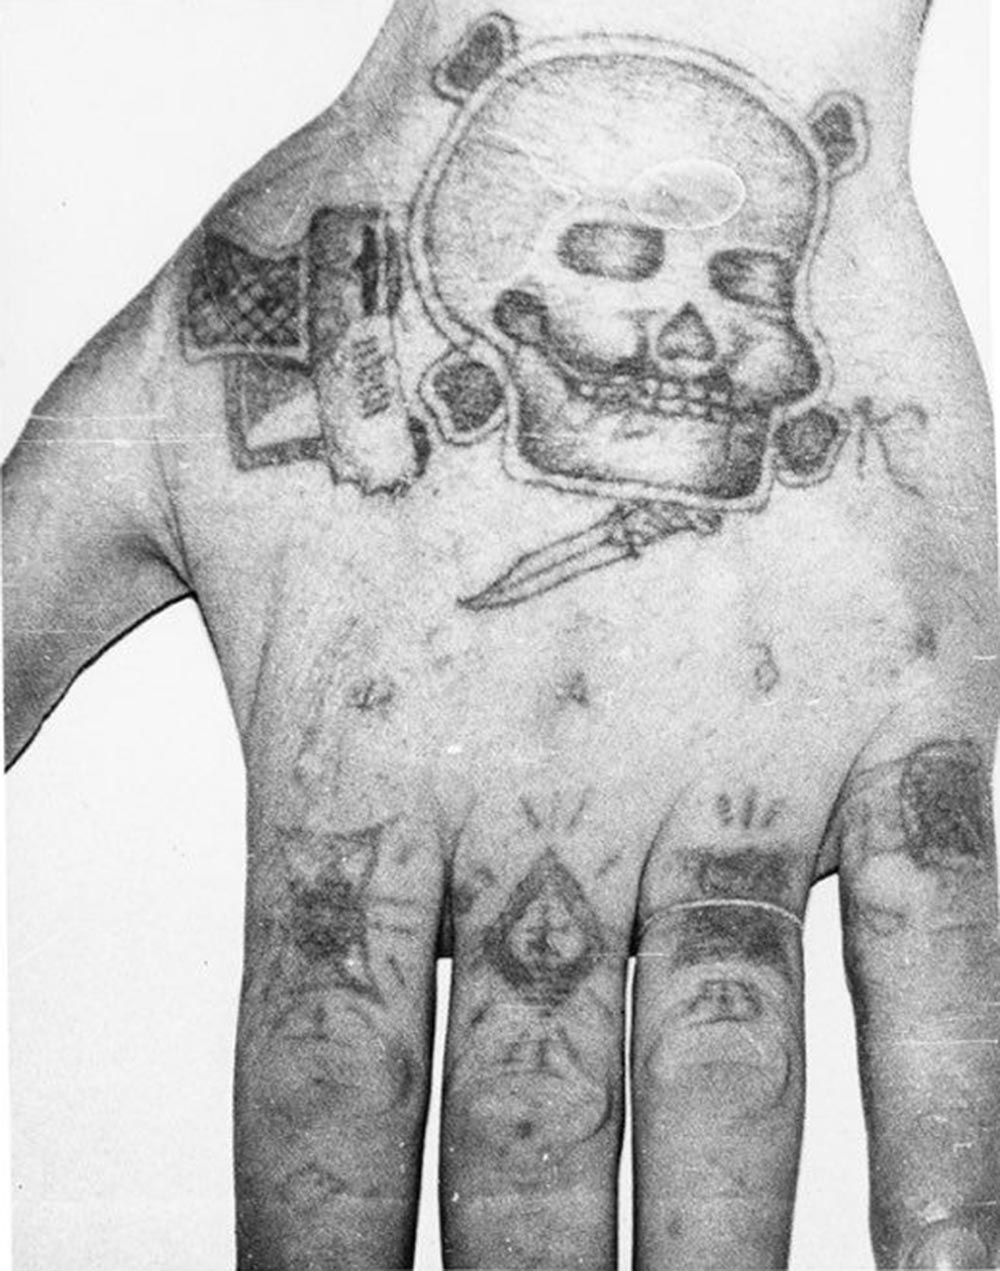 Text across the knuckes reads NADYA (womans name). The 'ring' on the forefinger stands for 'Rely on no one but yourself', a 'patsan' one of the most privileged inmates VTK. Middle finger 'the thieves cross' of a pickpocket. Third finger: 'I served my time in full', 'From start to finish', 'Went without parole', the prisoner served his complete sentence with no remission for working with the system. Little finger 'The dark life' the bearer spent a lot of time in a punishment cell. The skull and crossbones, gun, knife and letter 'K'[iller] denote a murderer.